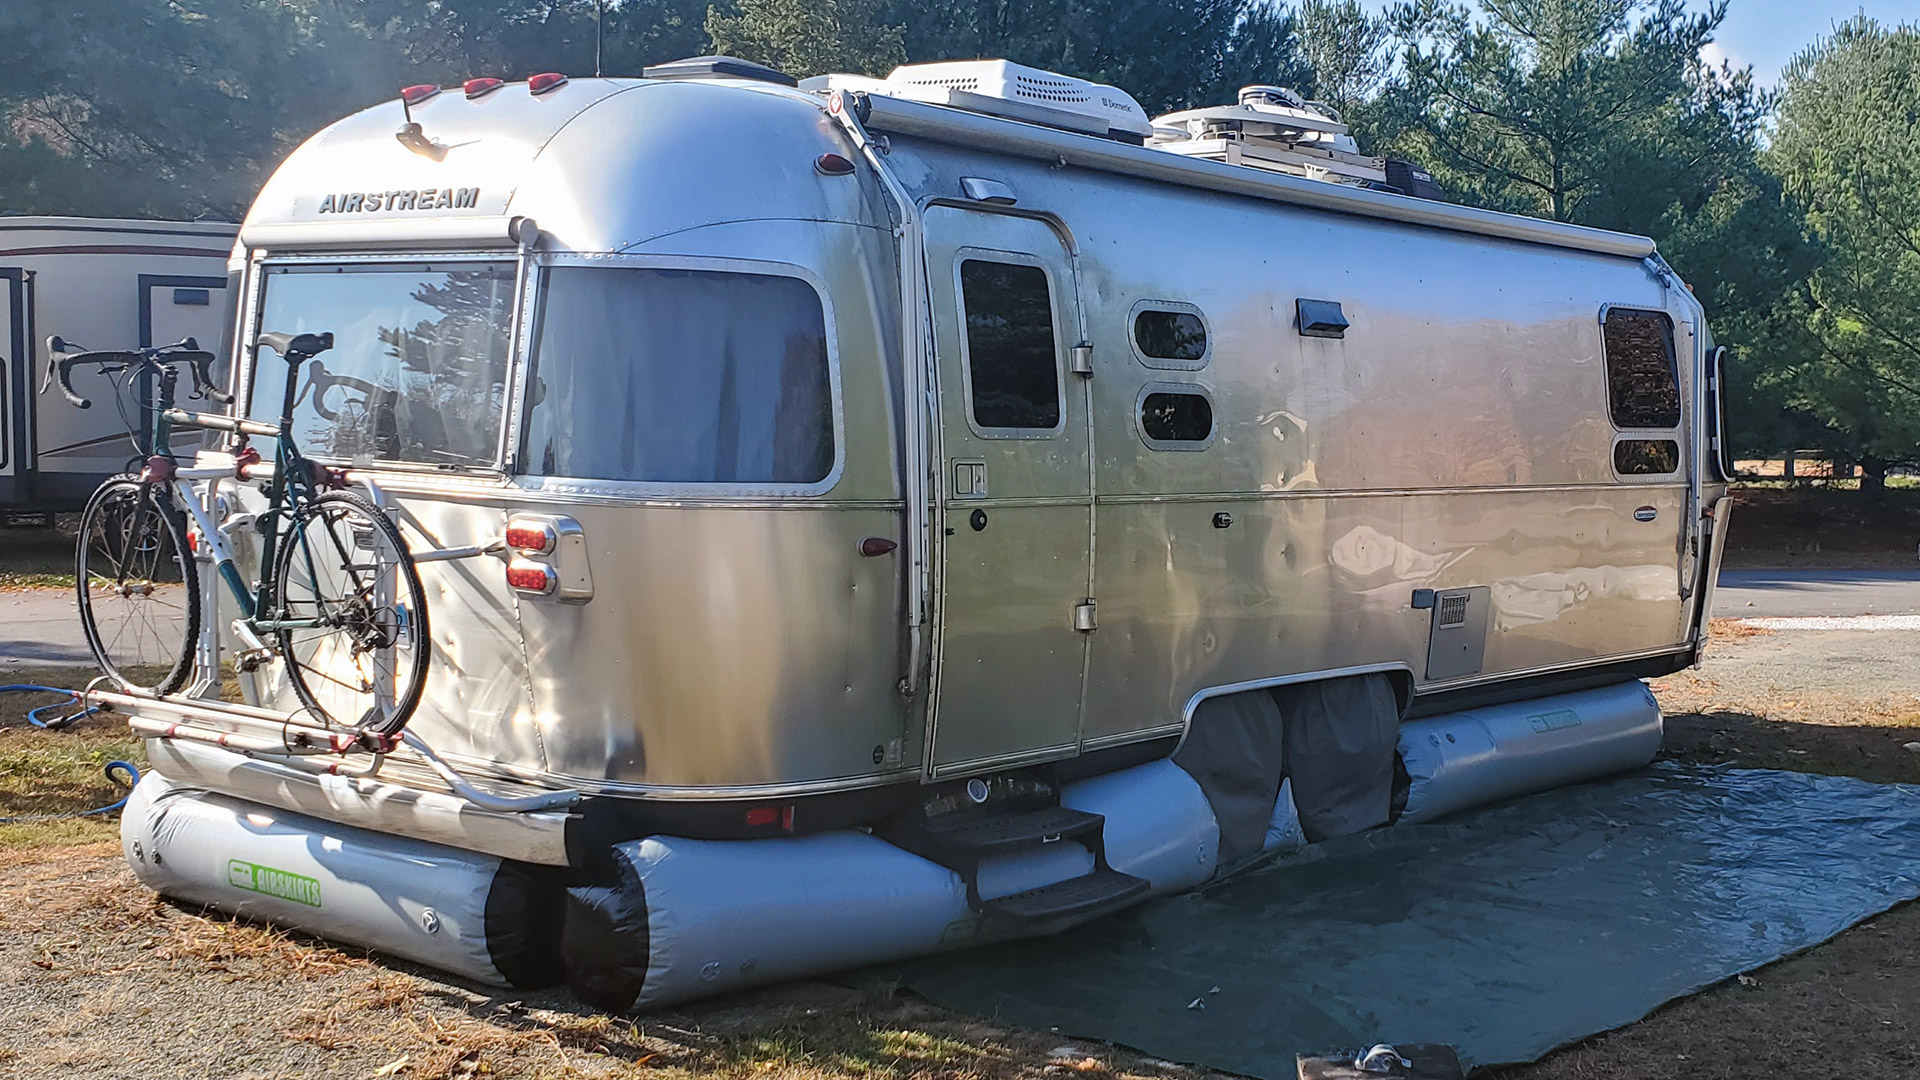 Camper skirting on Airstream